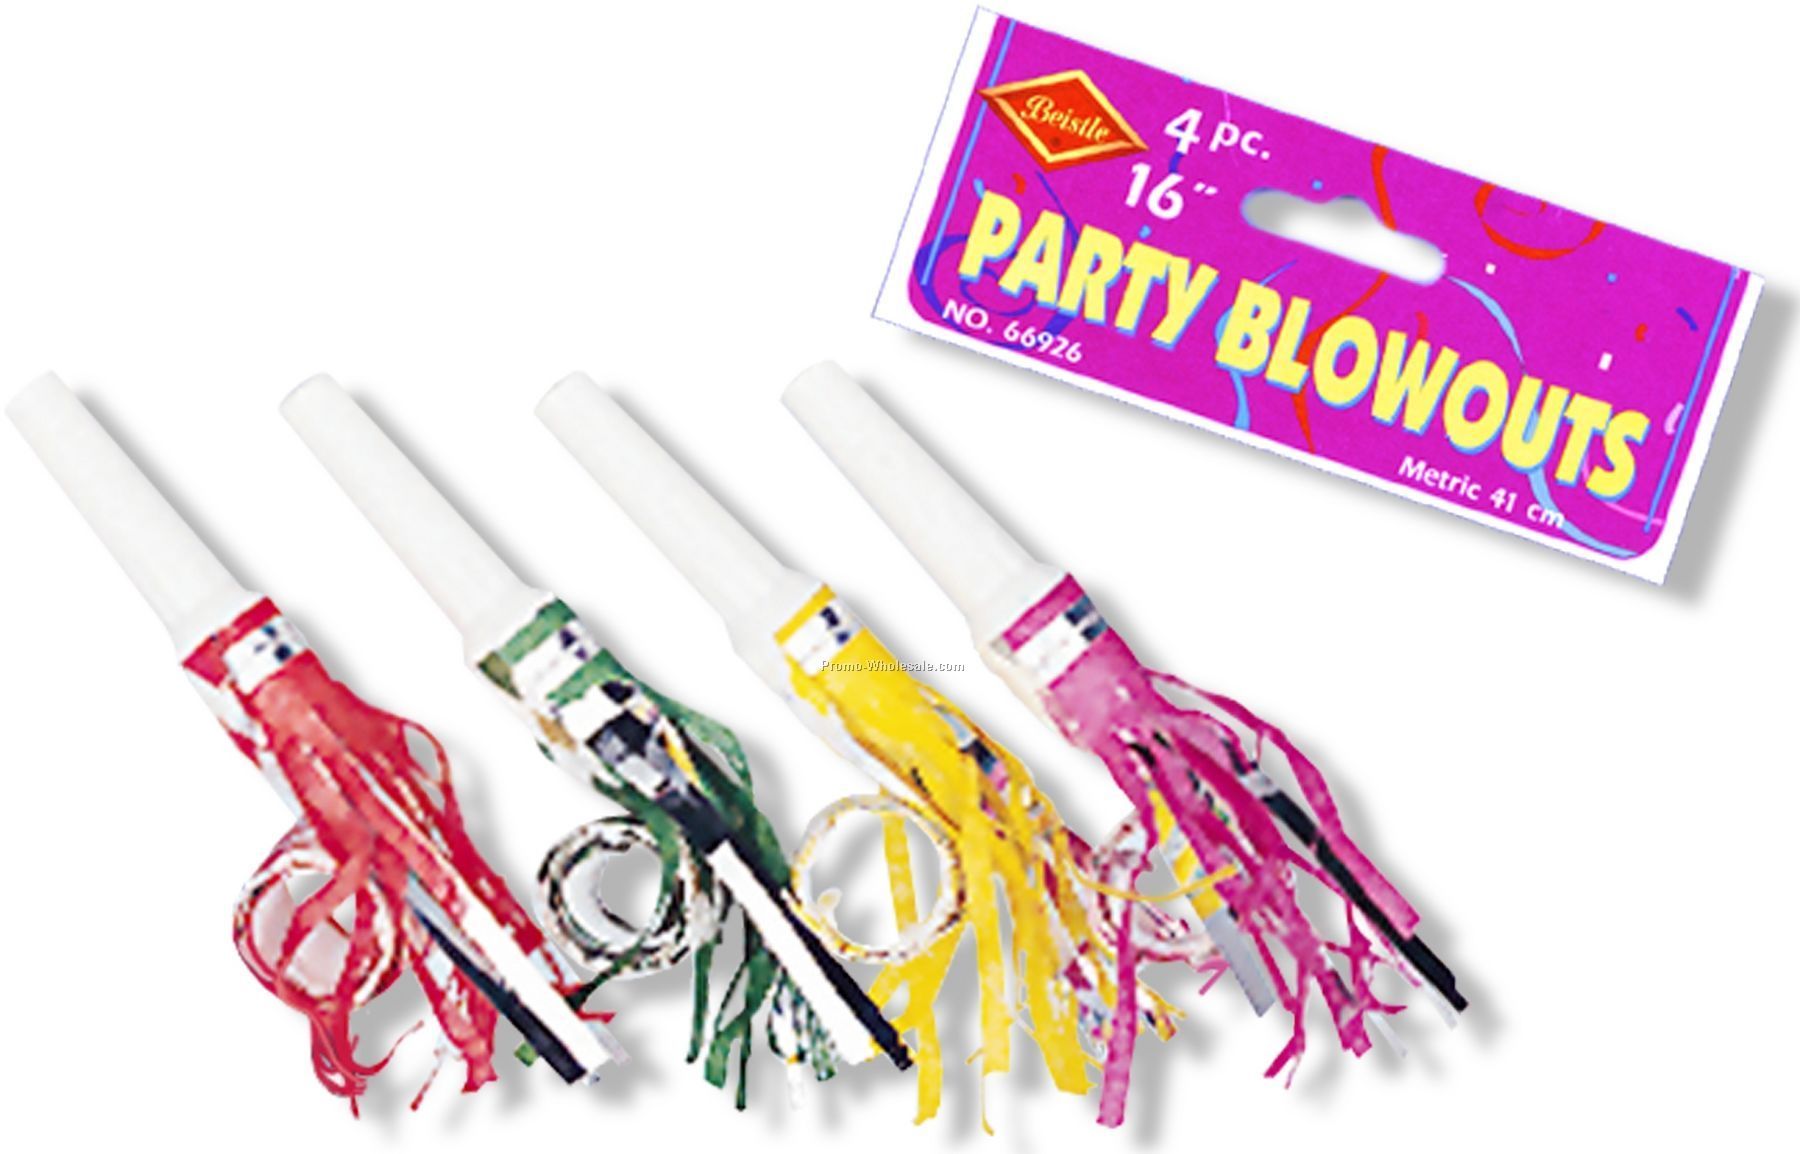 16" Packaged Fringed Party Blowouts